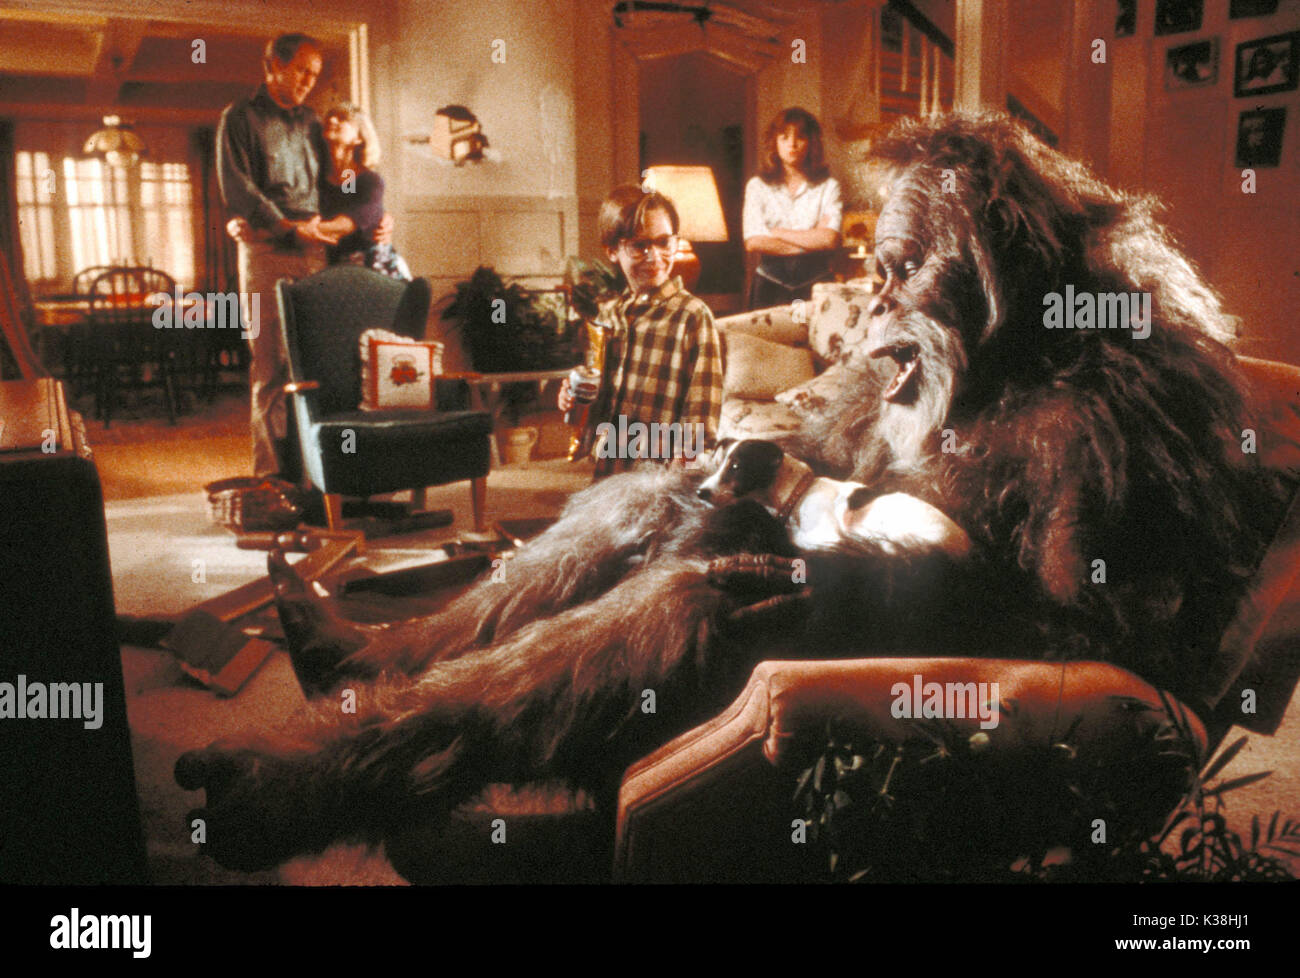 HARRY AND THE HENDERSONS aka Bigfoot And The Hendersons JOHN LITHGOW, MELINDA DILLON, KEVIN PETER HALL, as Harry, JOSHUA RUDOY AND MARGARET LANGRICK HARRY AND THE HENDERSONS      Date: 1987 Stock Photo